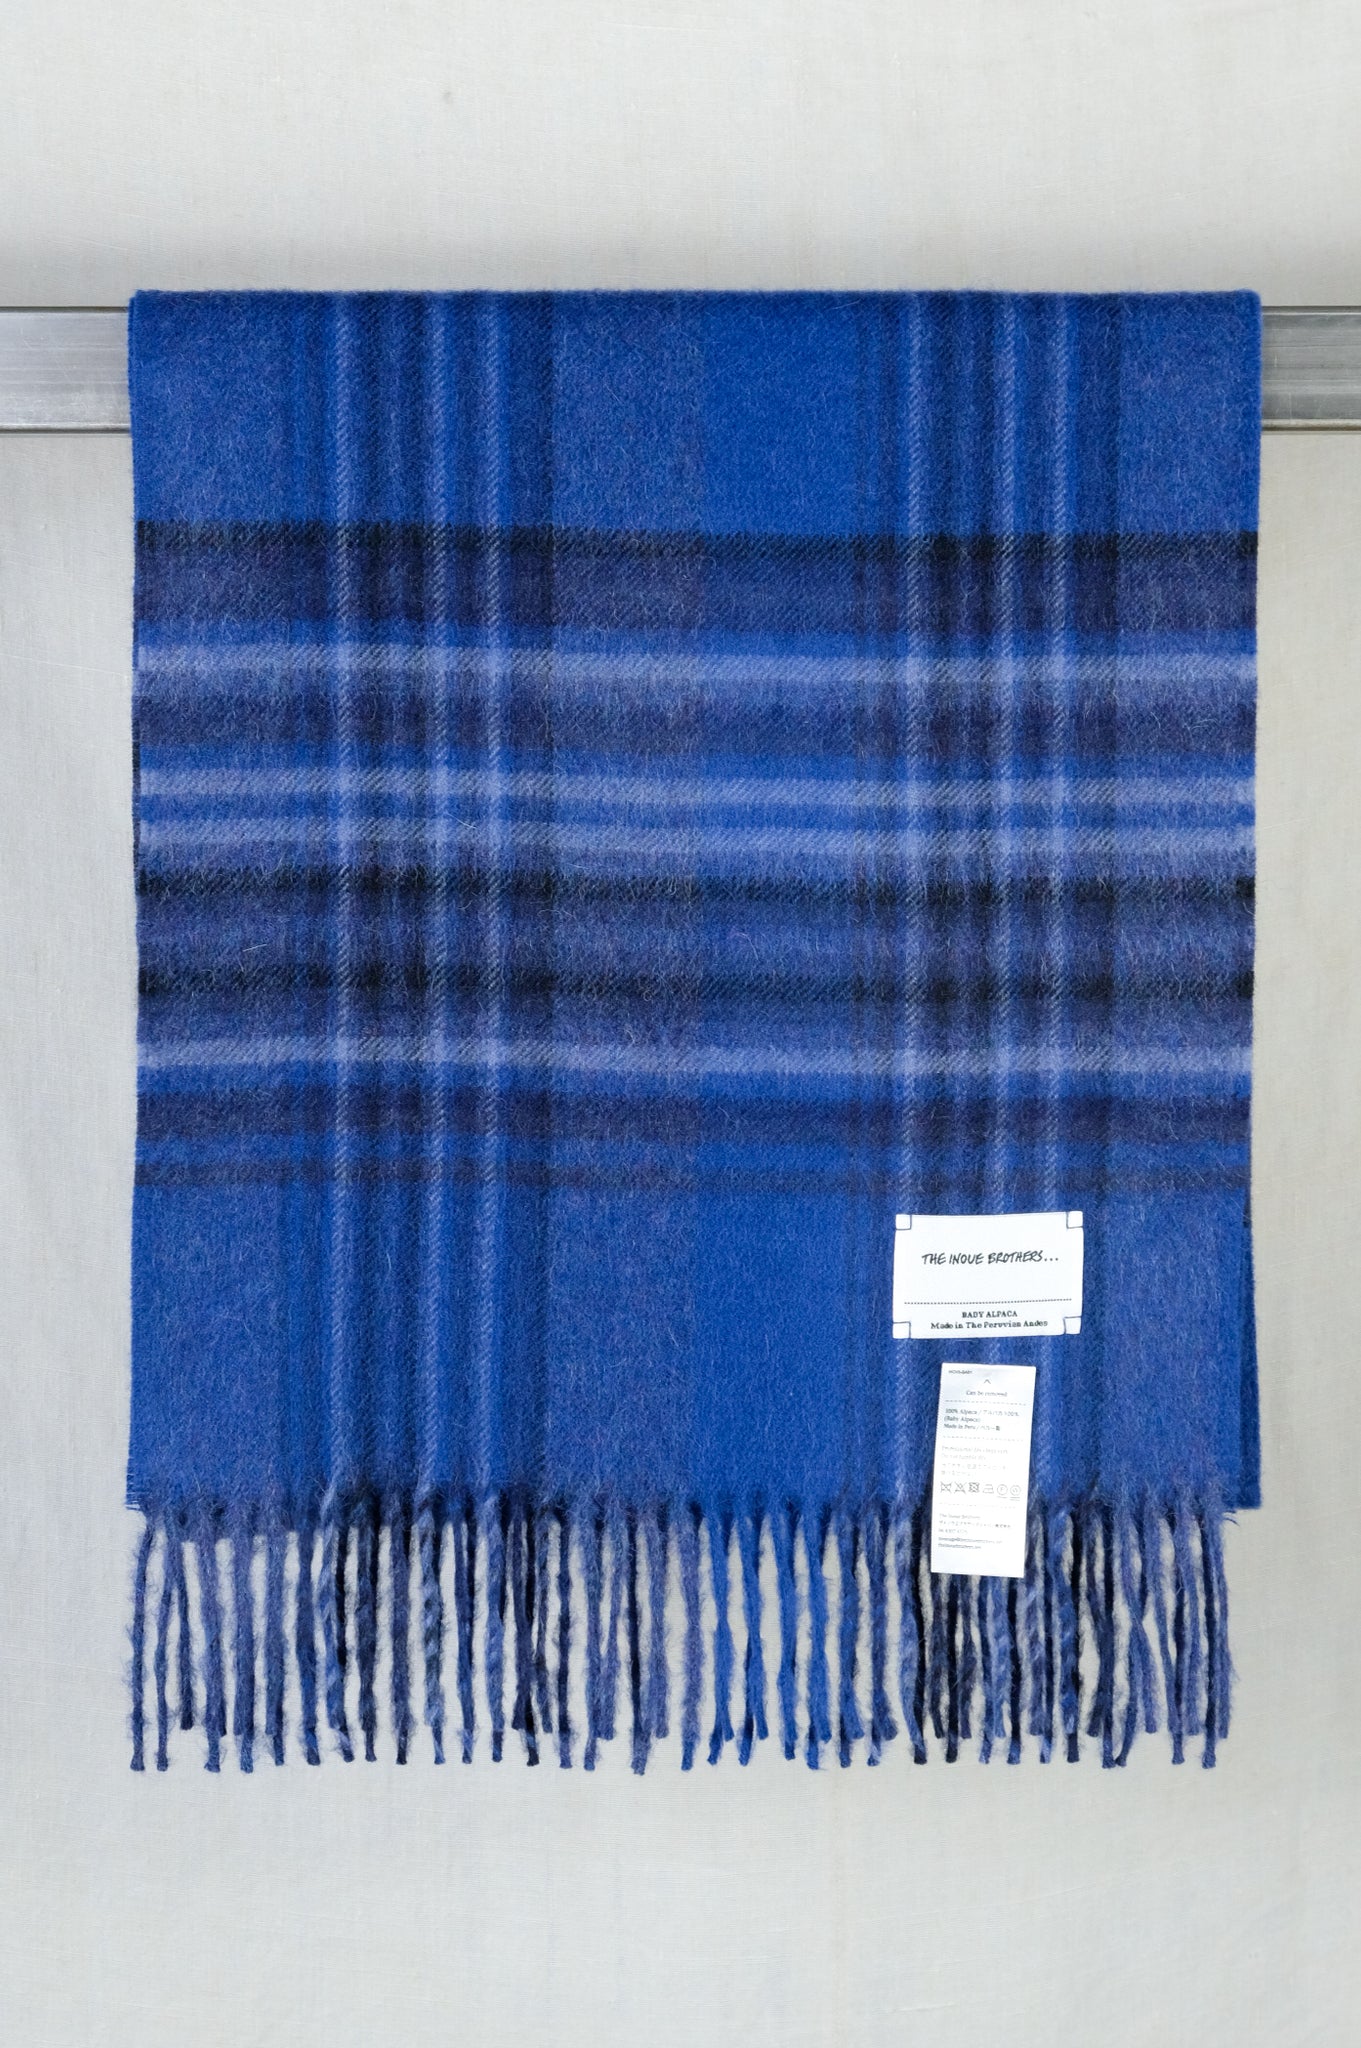 THE INOUE BROTHERS..."Brushed Scarf (pattern) / Checkered Navy"